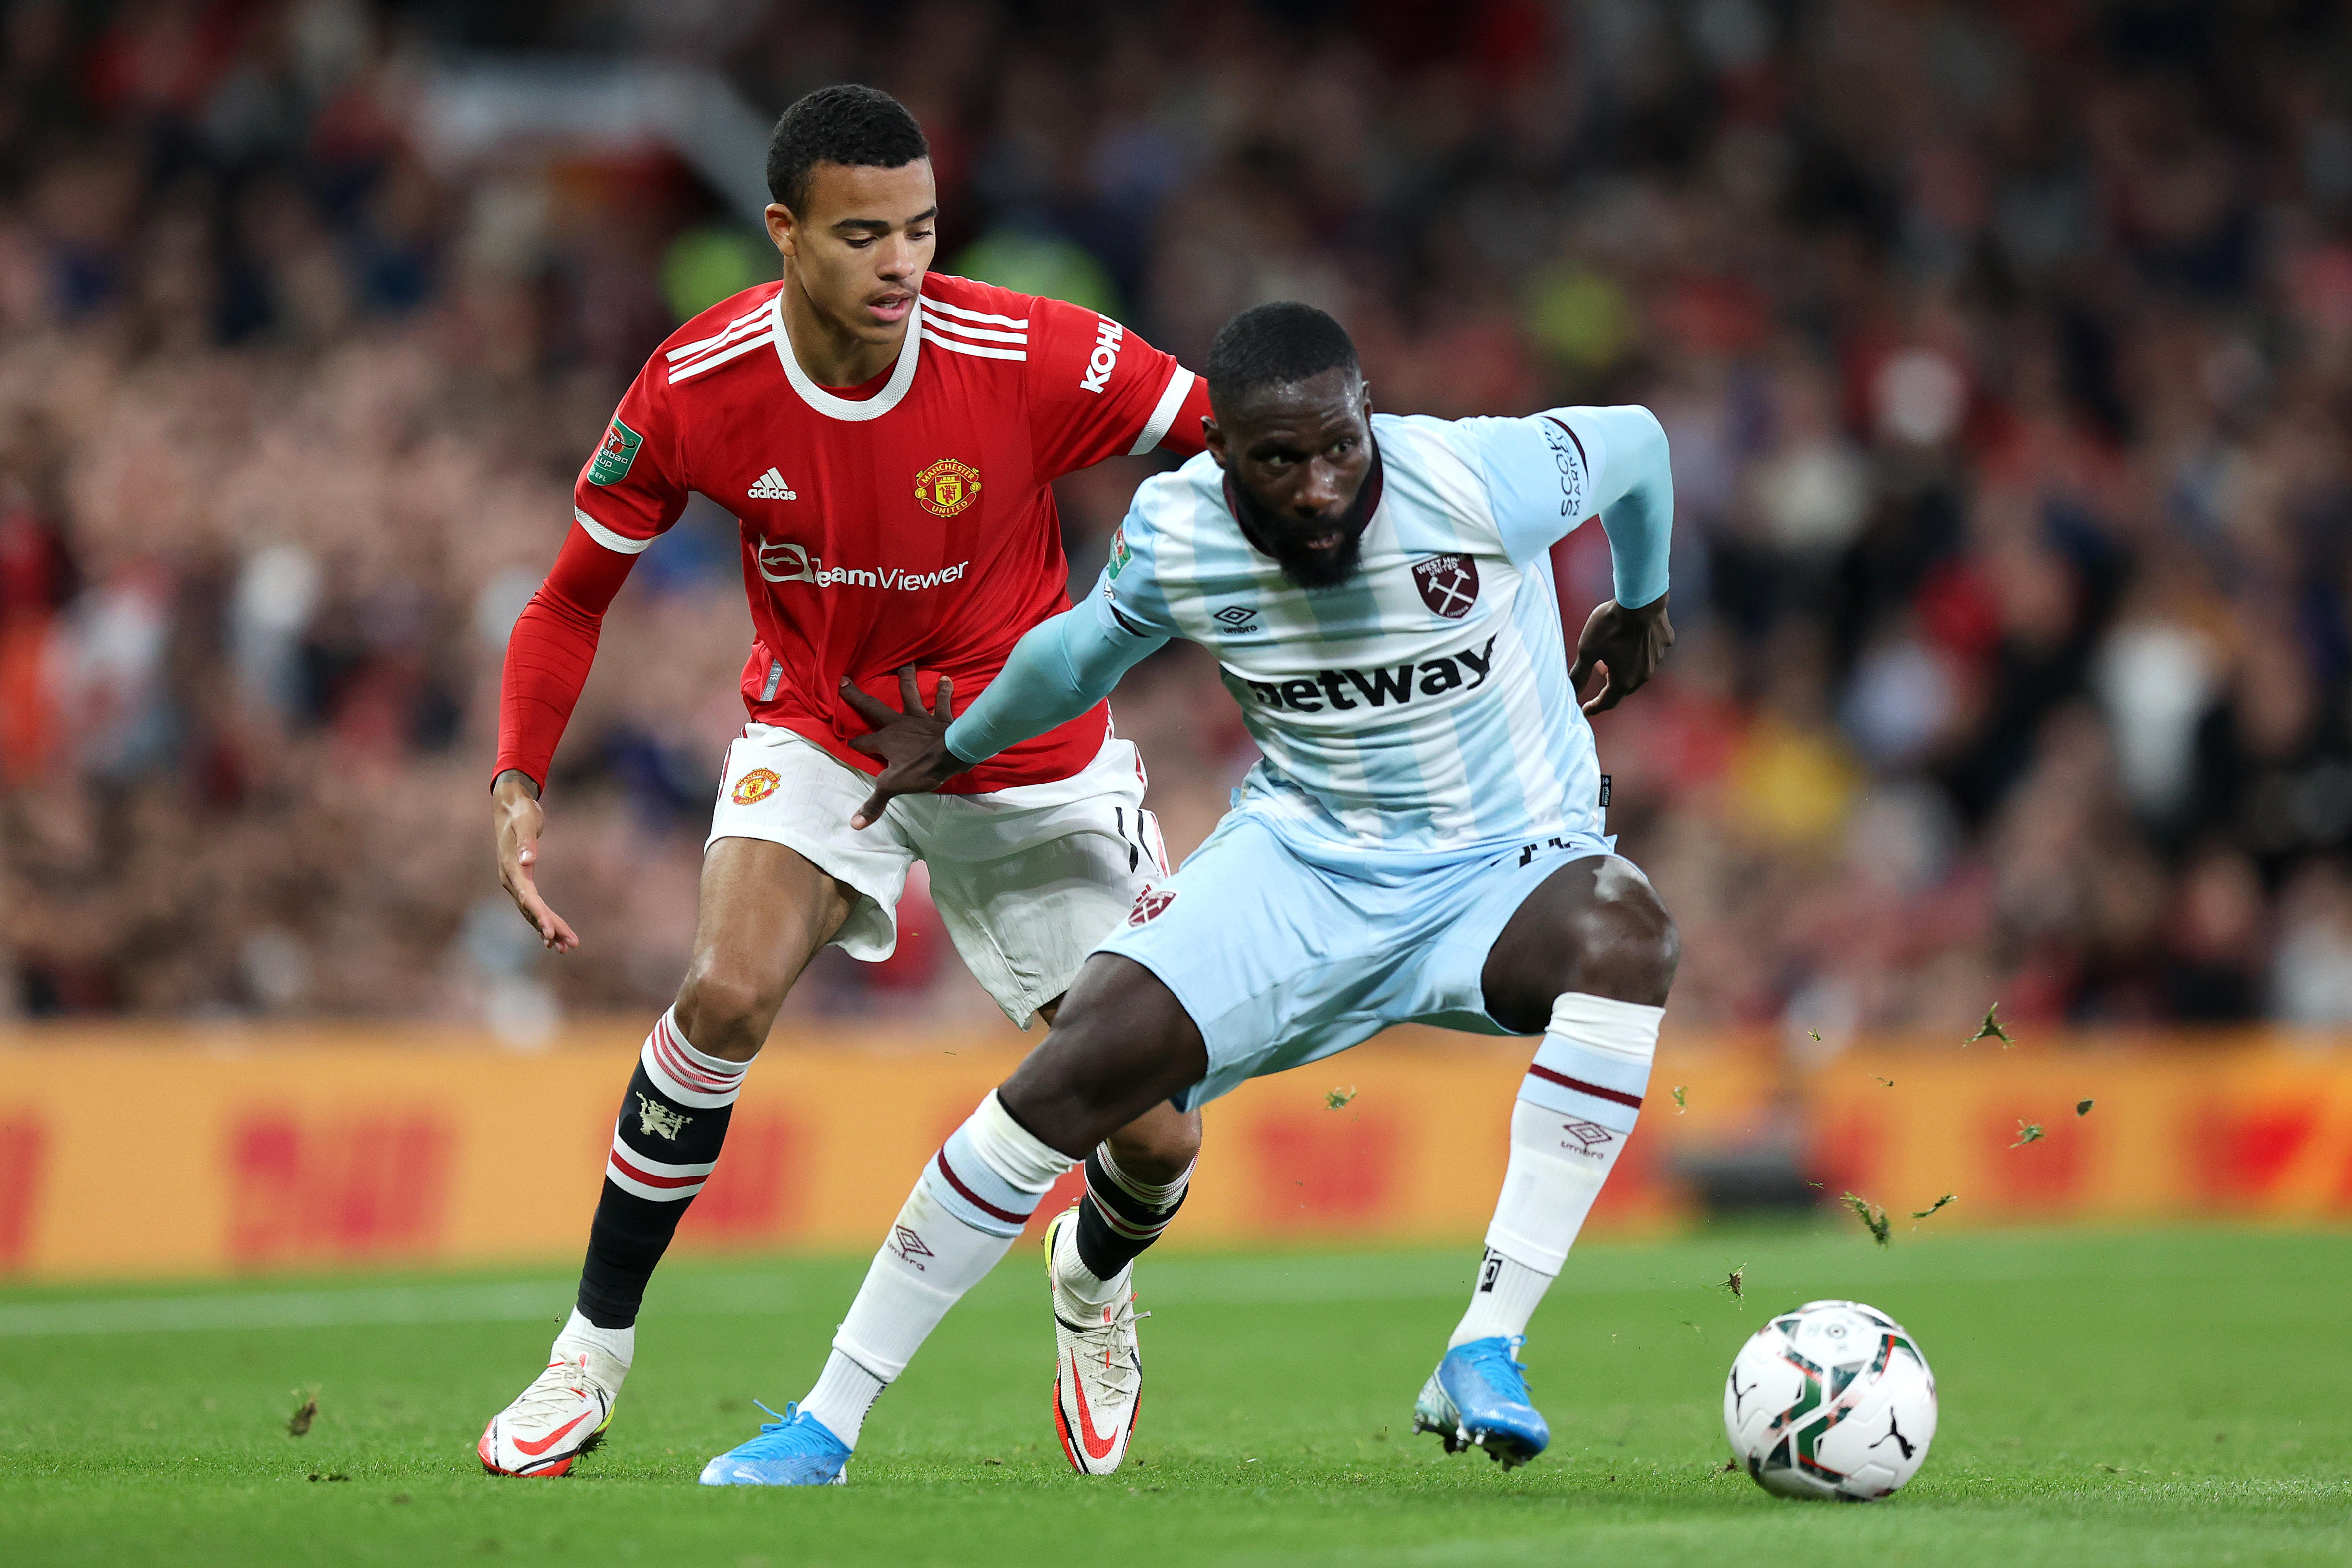 Manchester United v West Ham United - Carabao Cup Third Round